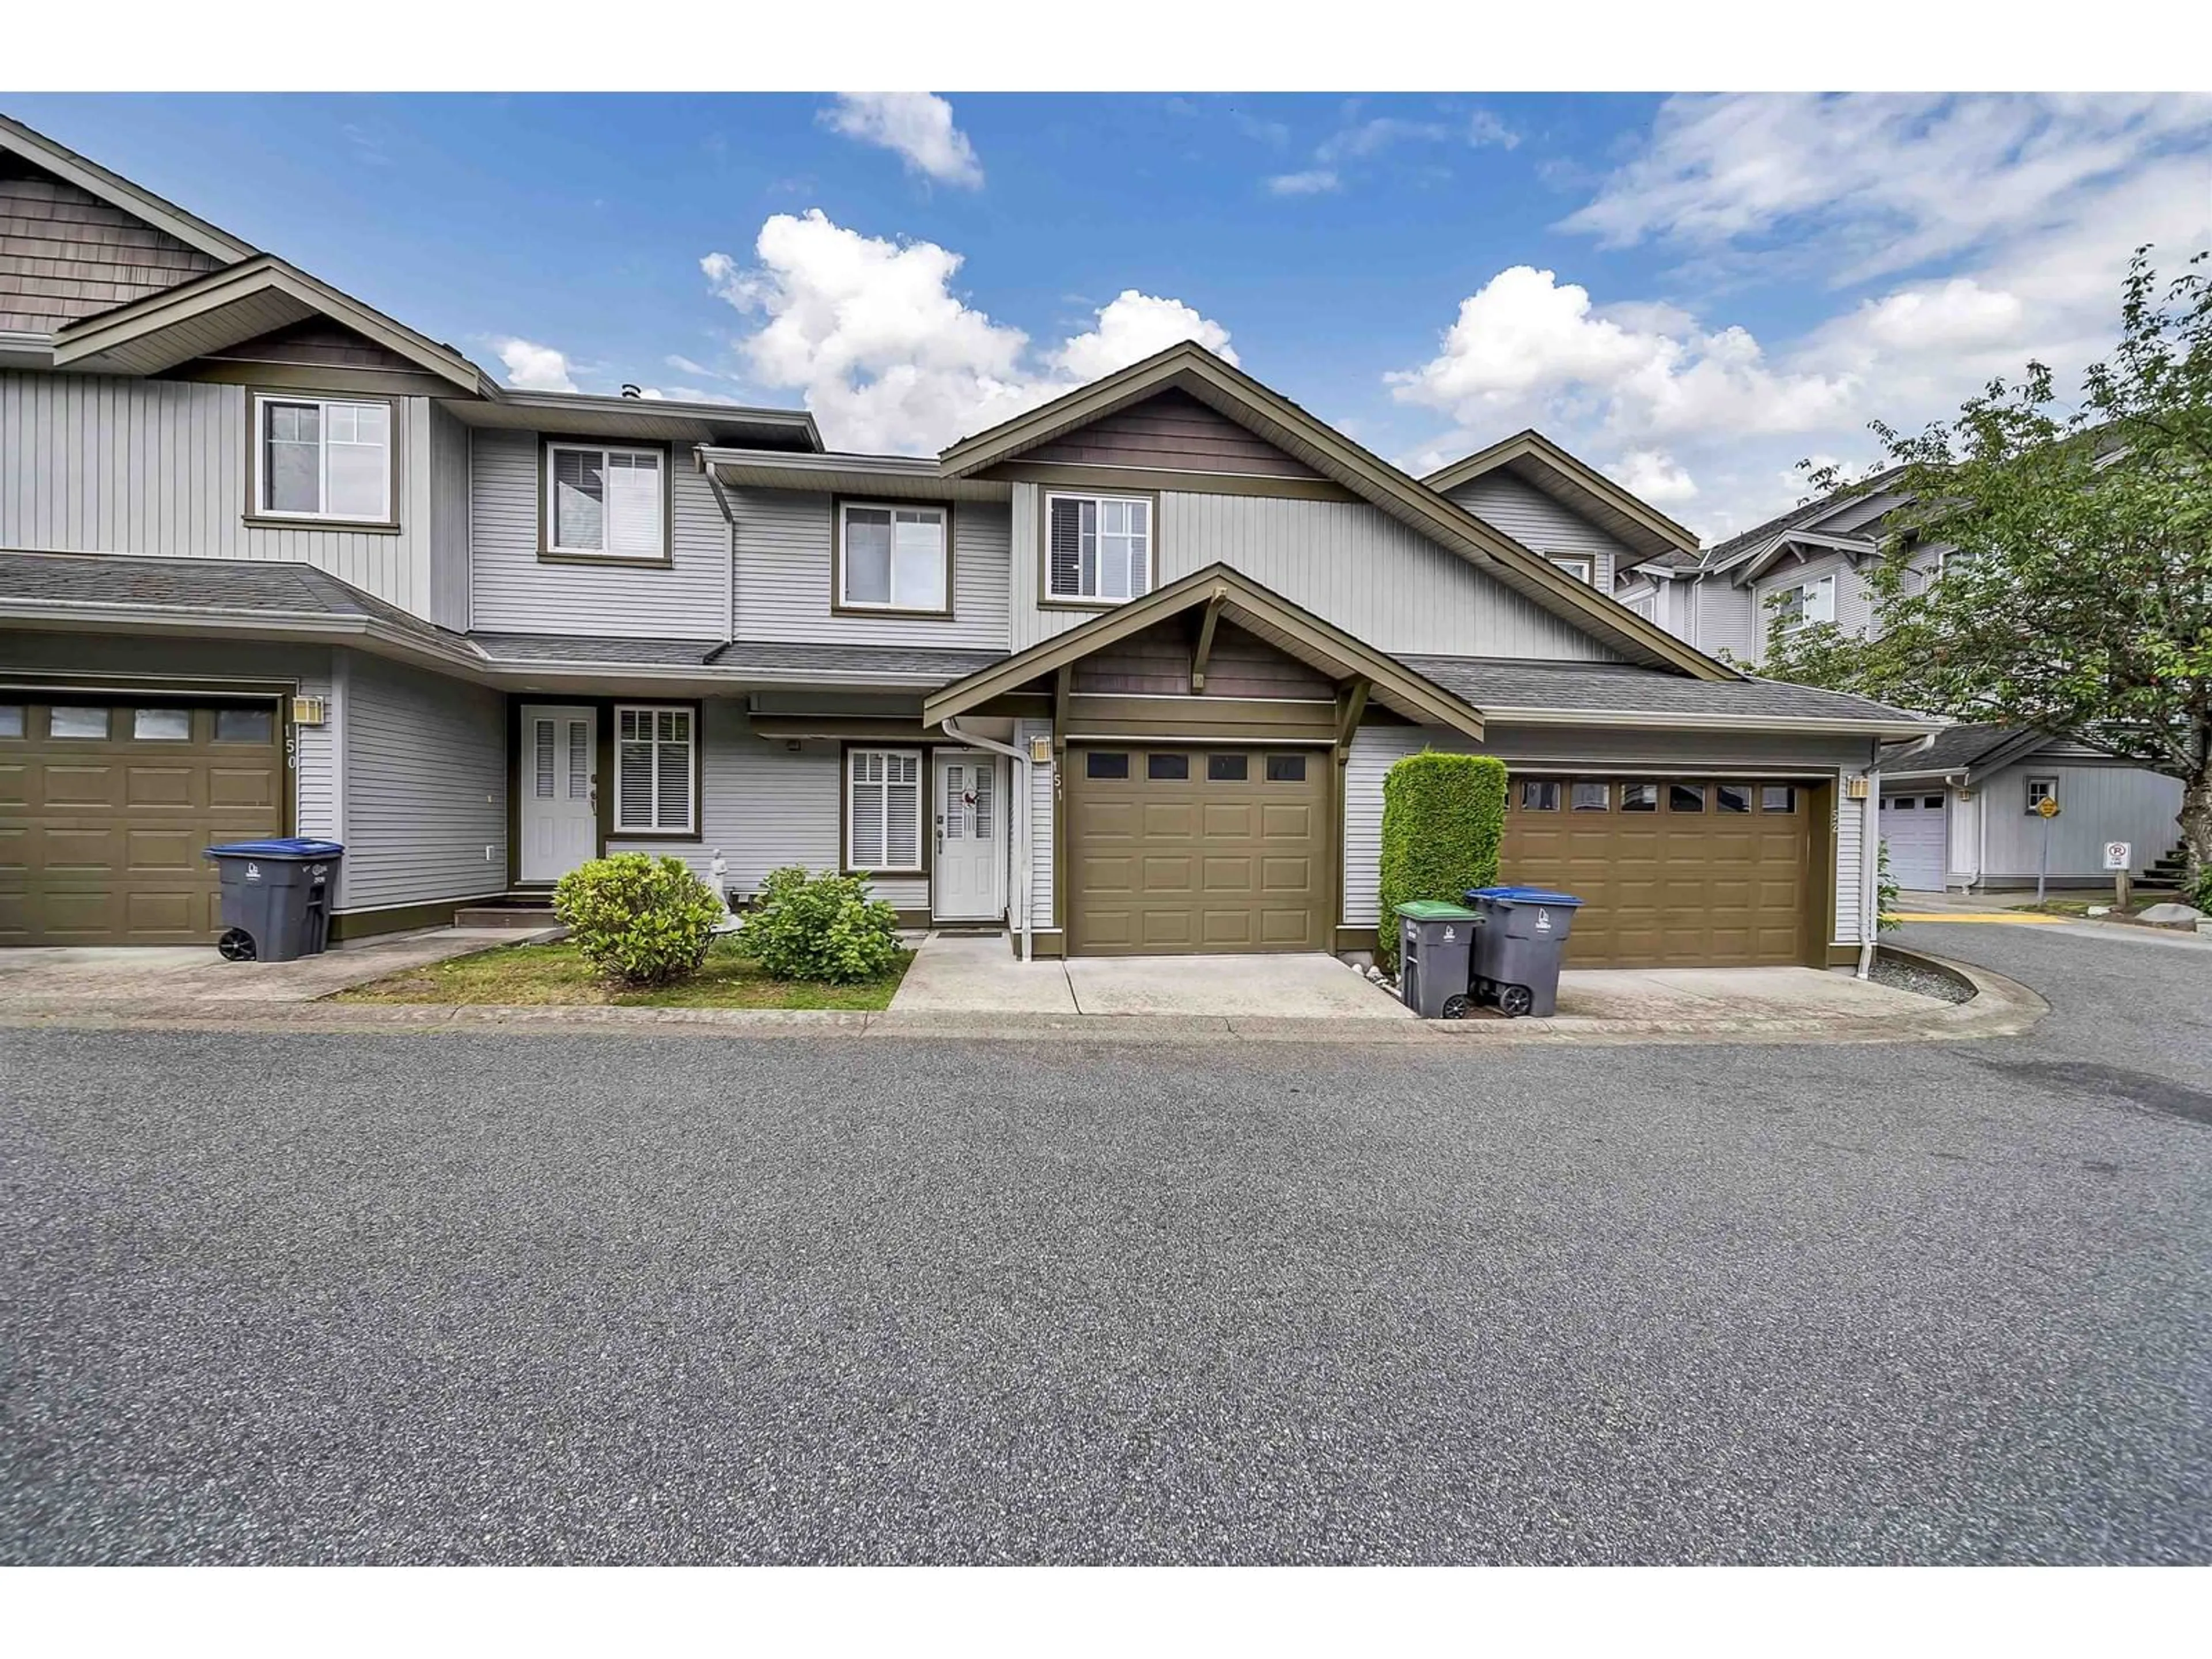 A pic from exterior of the house or condo for 151 12040 68 AVENUE, Surrey British Columbia V3W1P5